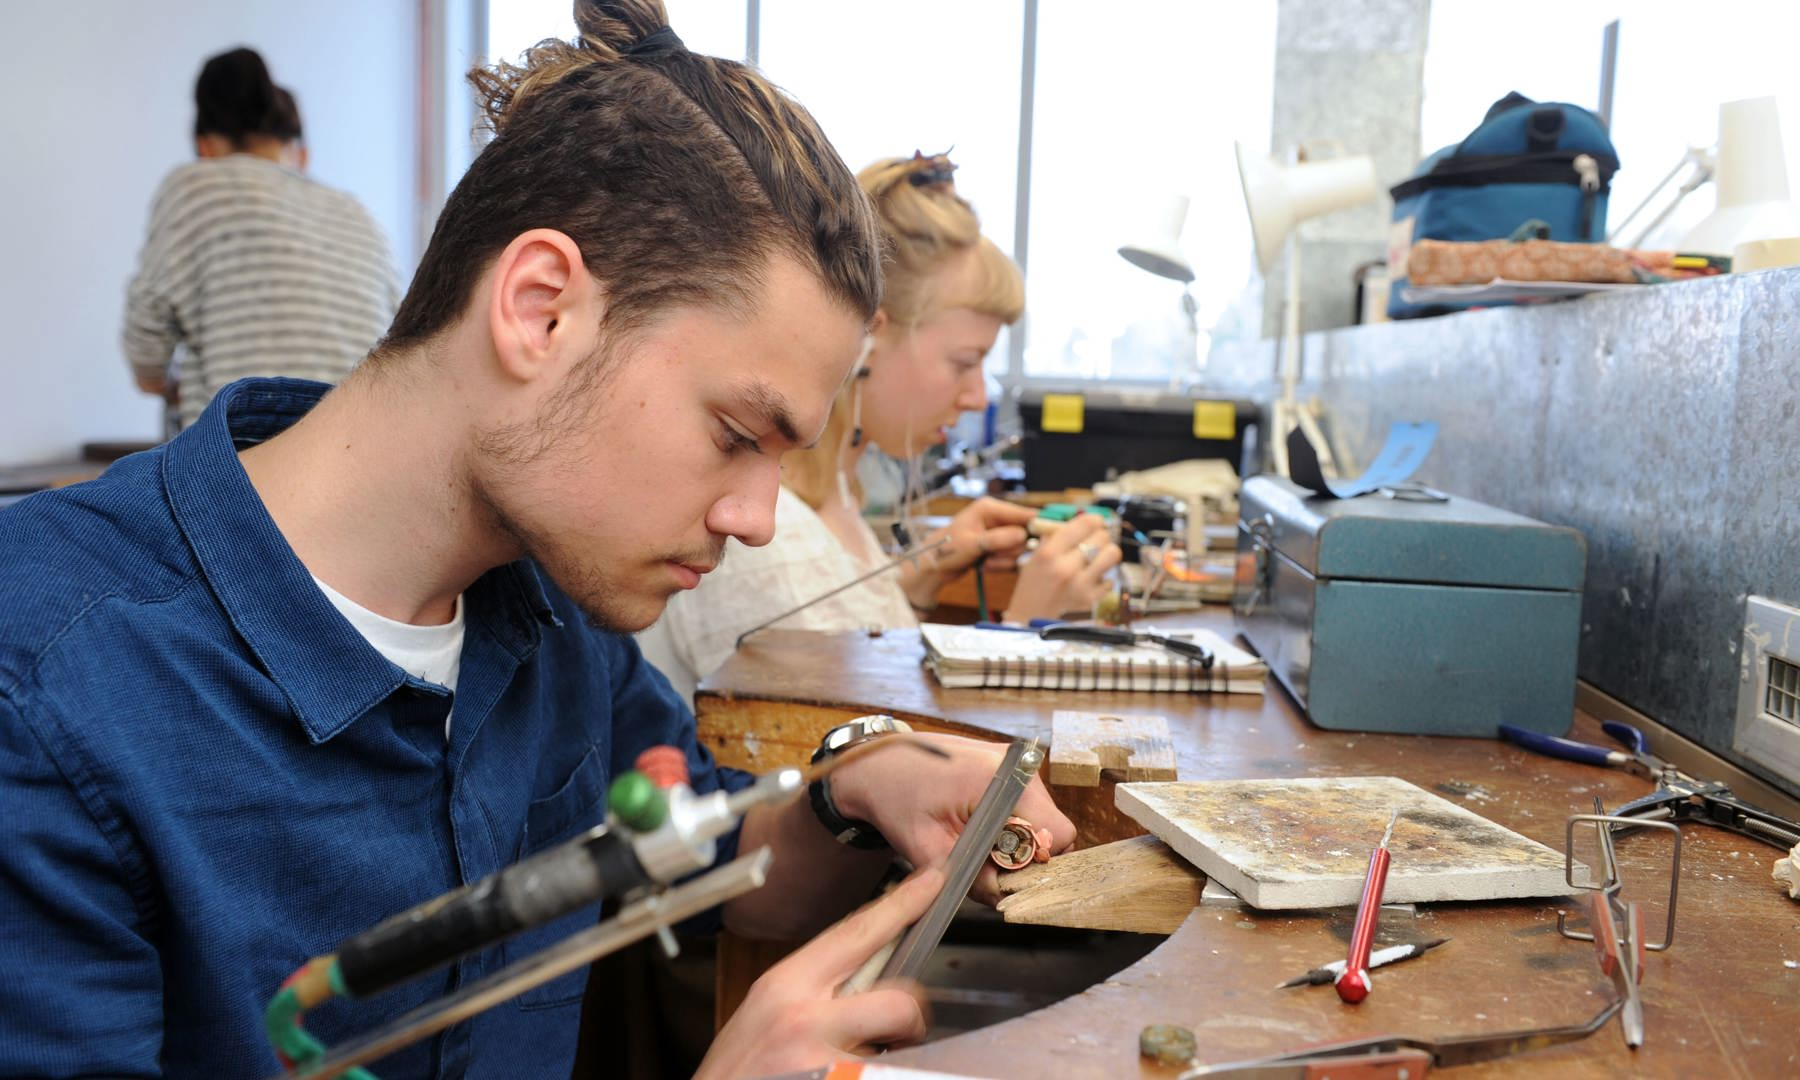 Student using a  jeweller's tool at a workshop station